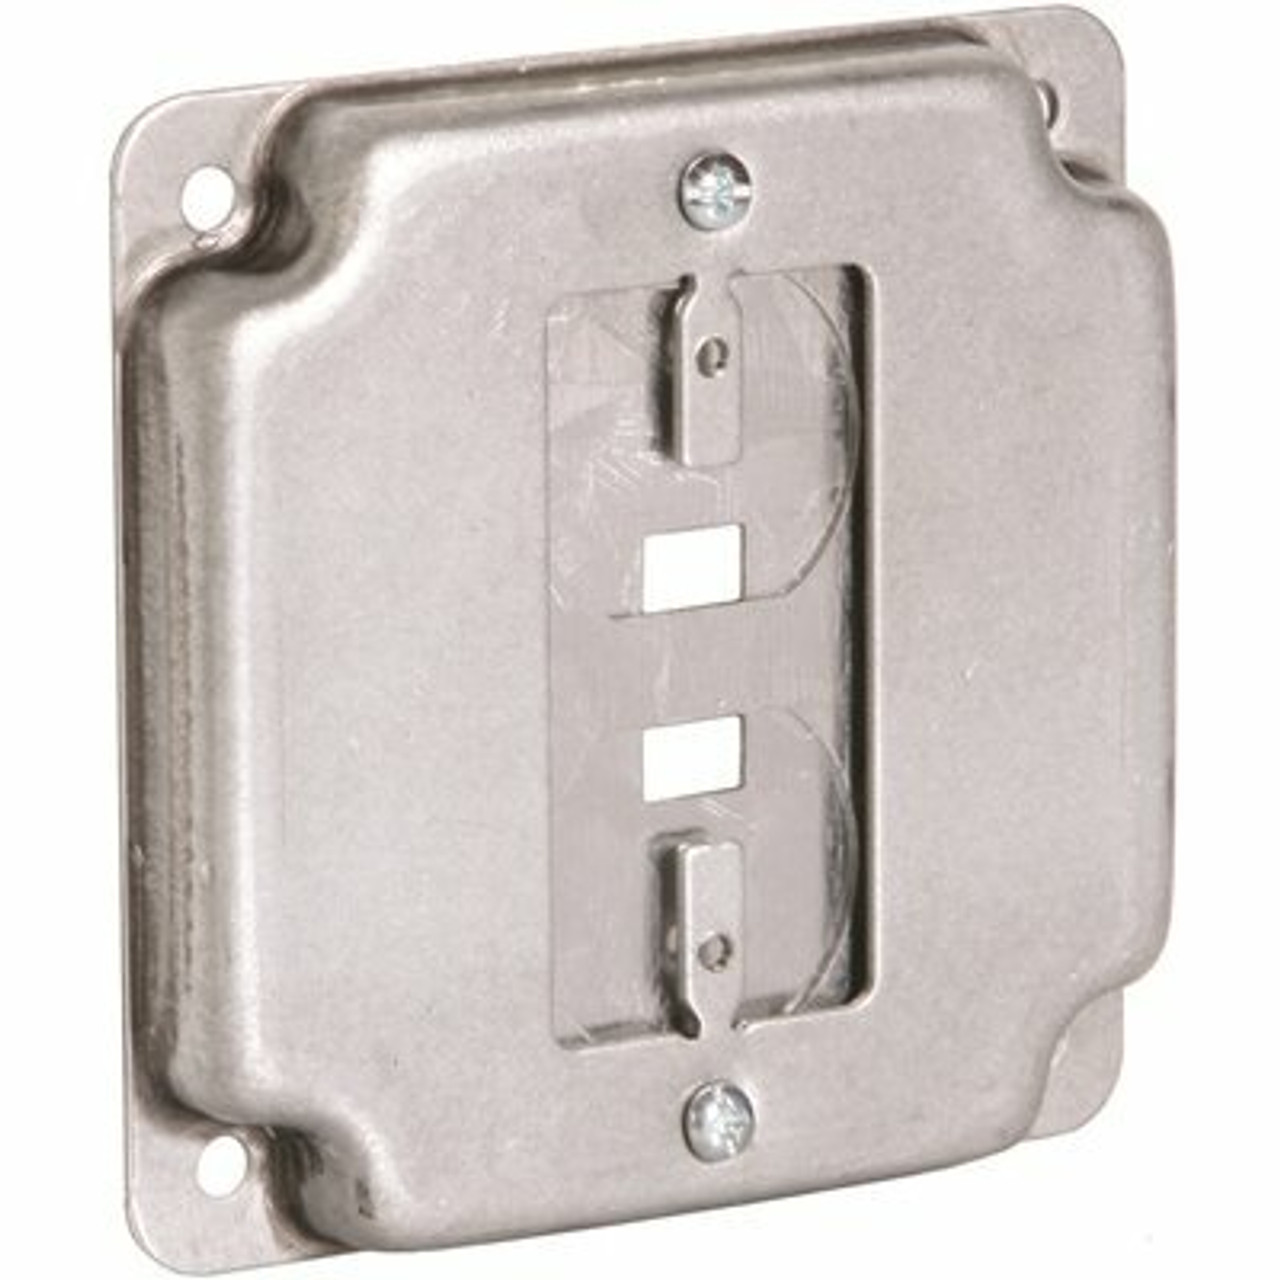 Raco 4 In. Square Exposed Work Cover, Single Device 3-In-1 Universal Cover